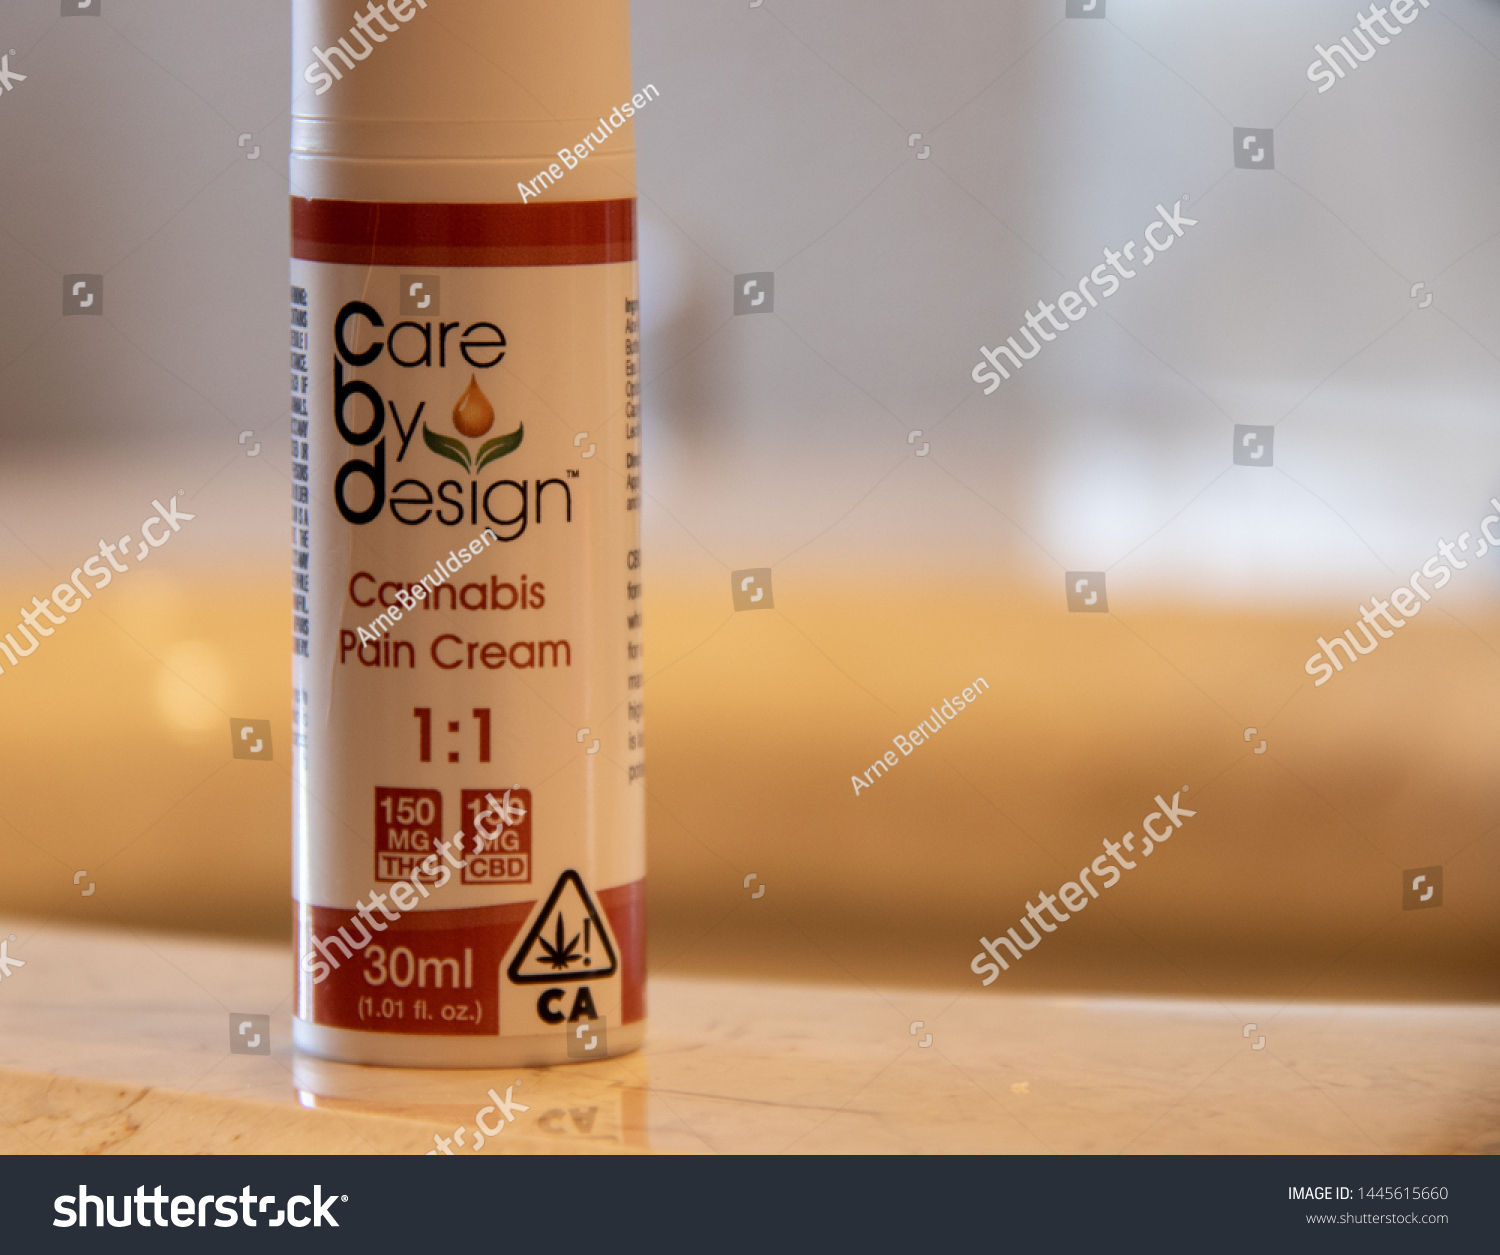 stock photo laguna hills ca usa cannabis pain cream made by care by design which contains both 1445615660